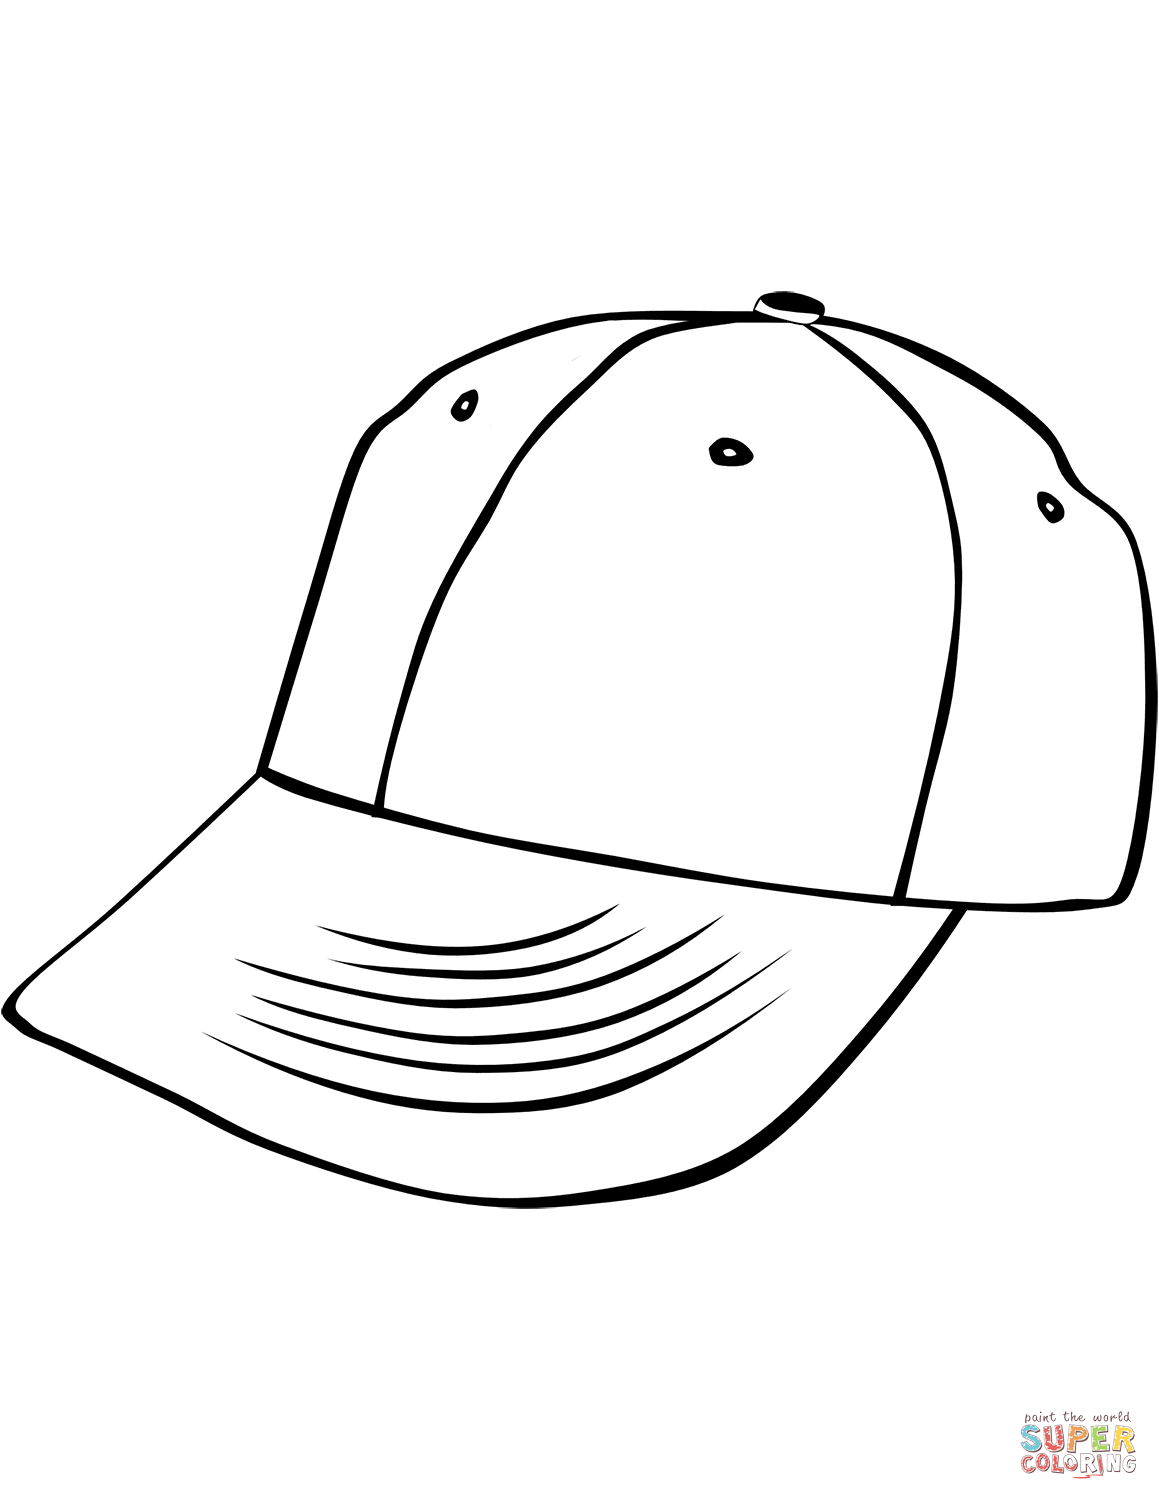 Baseball Cap coloring page | Free Printable Coloring Pages